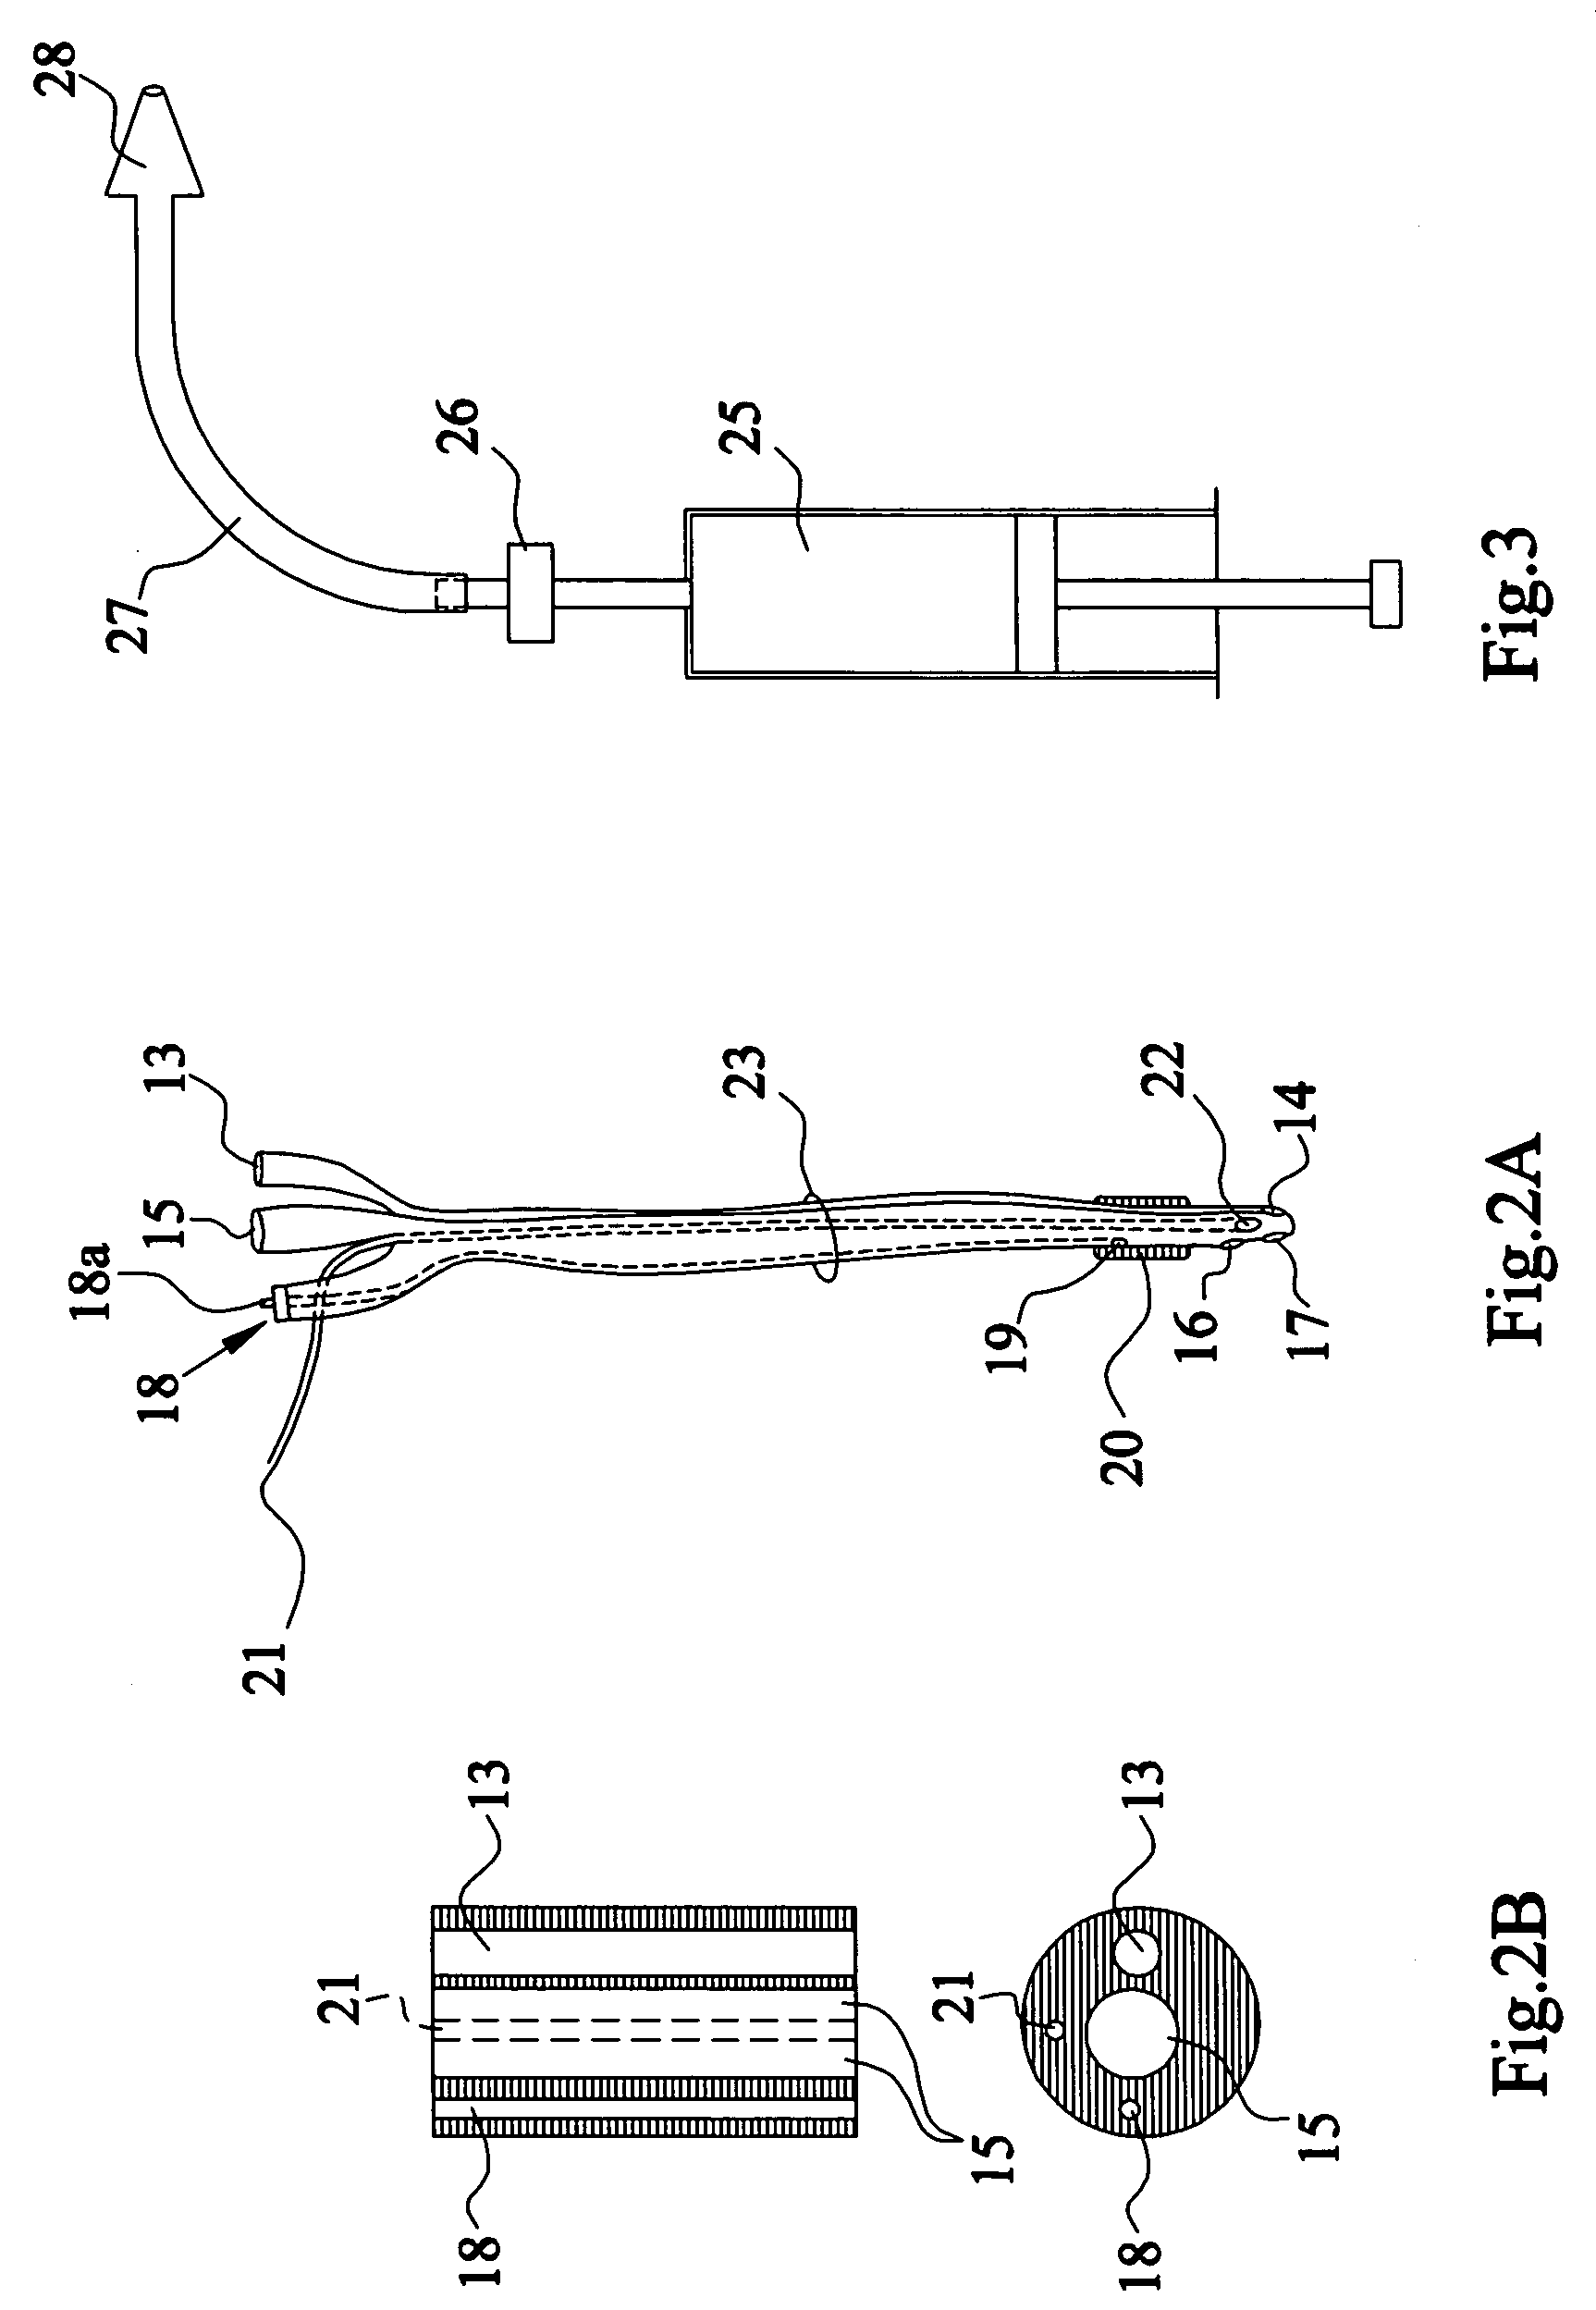 Apparatus and method for the controlled hydrodistention of the urinary bladder